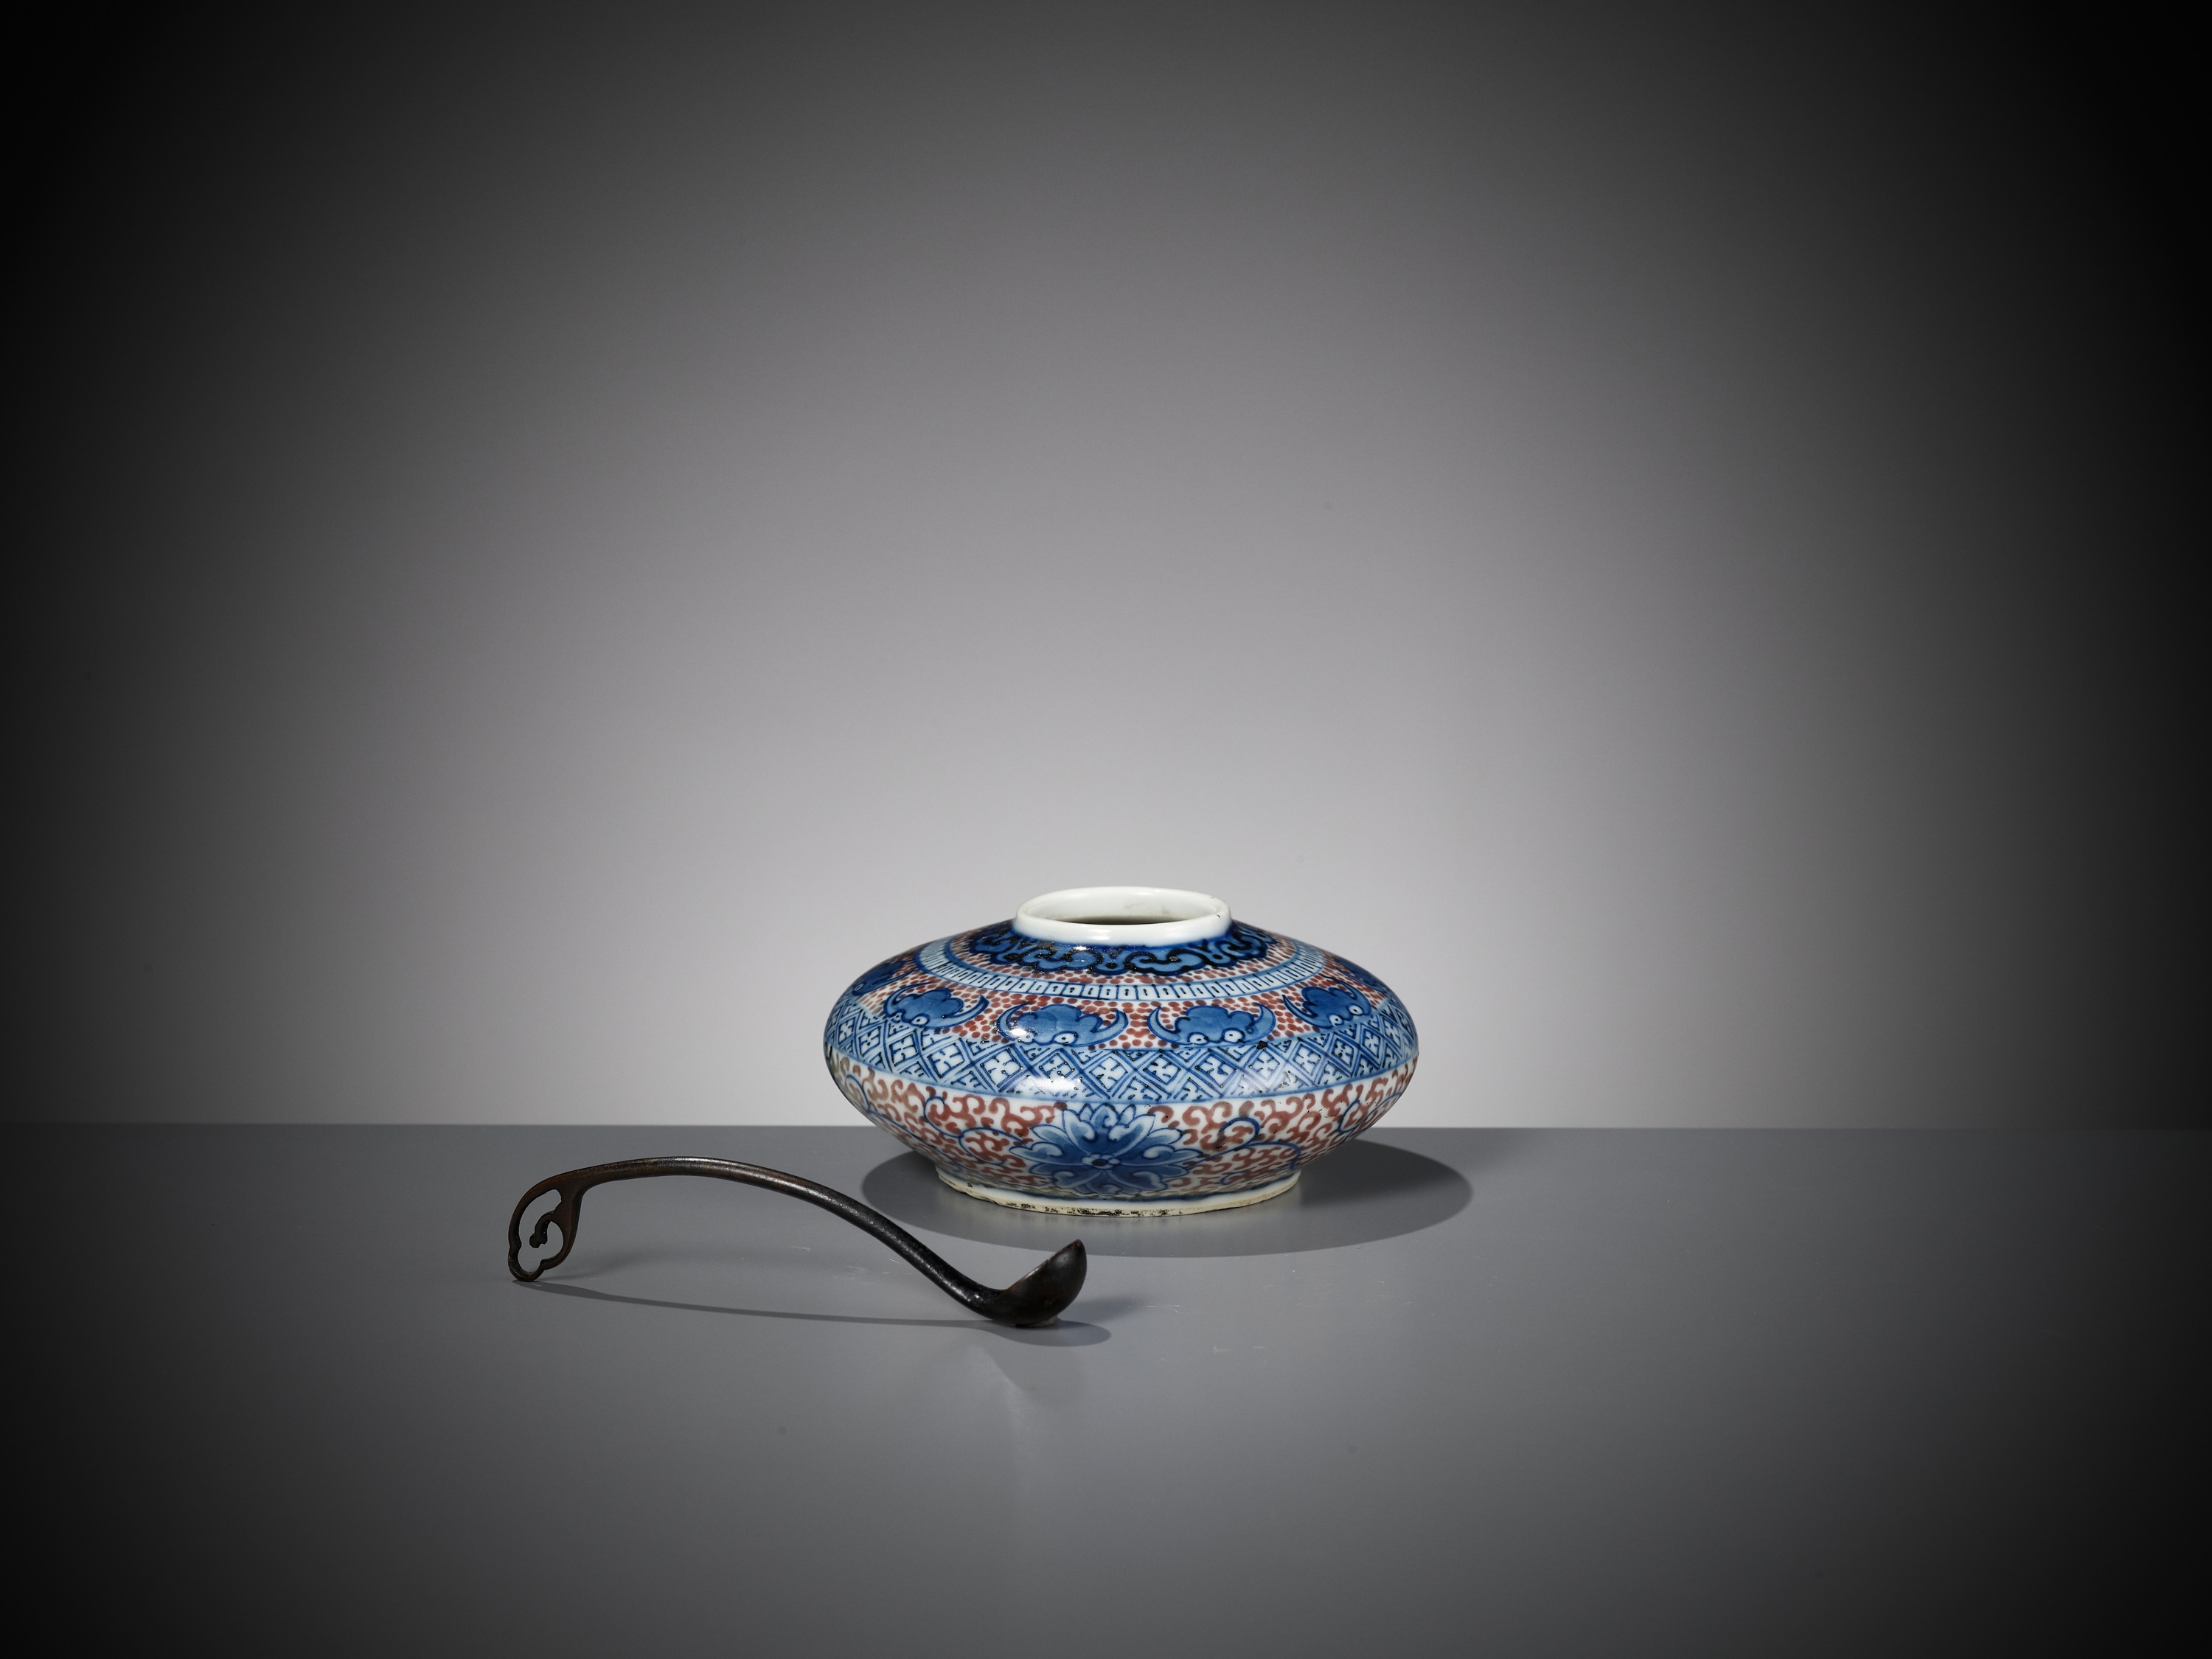 A PORCELAIN WATER POT, WITH MATCHING BRONZE SPOON AND WOOD STAND, QING DYNASTY - Image 11 of 14